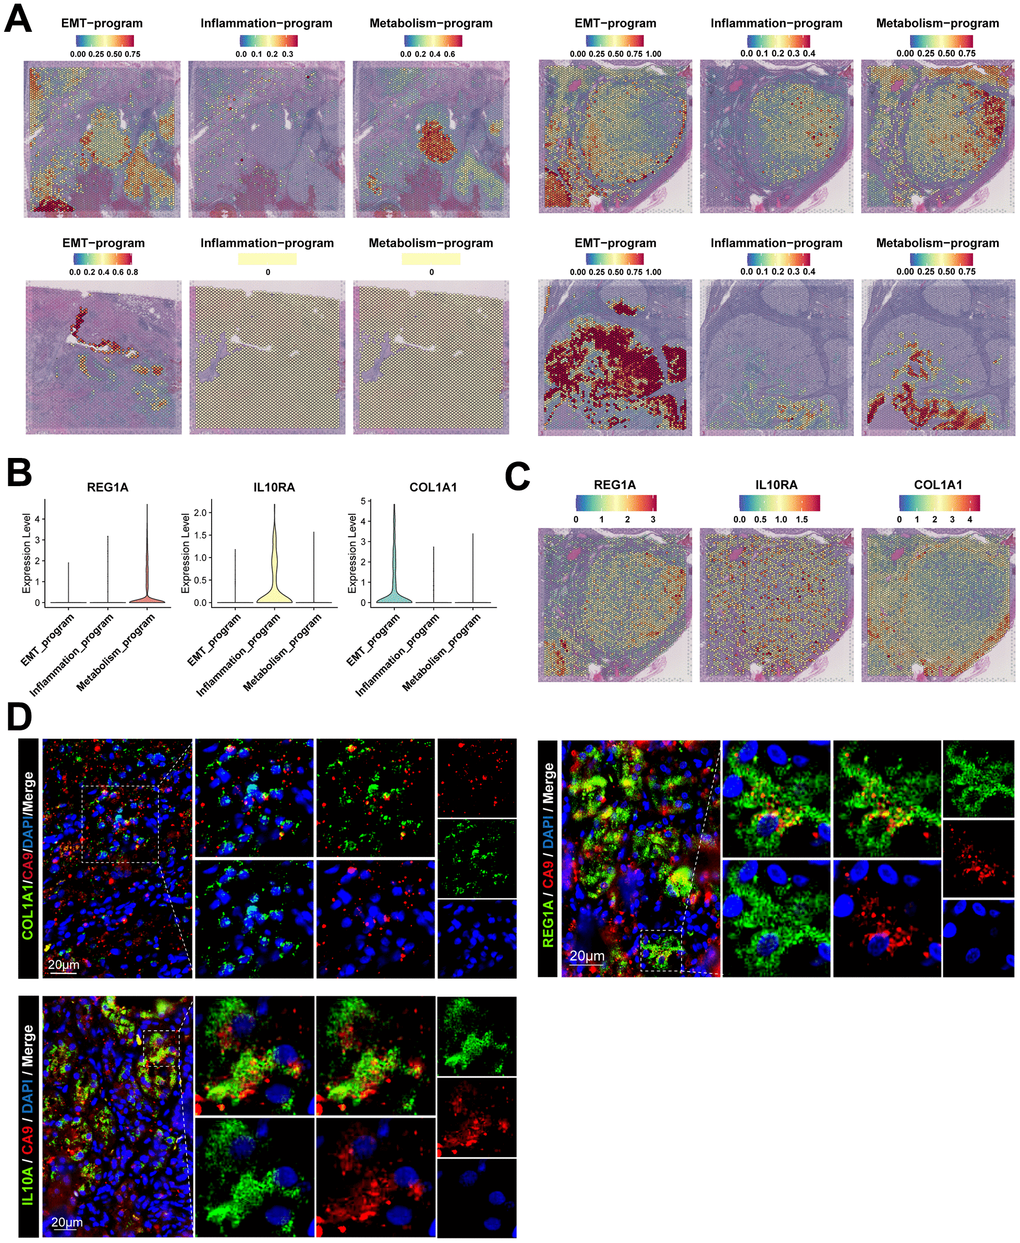 Spatial location information and signature gene characteristics of functionally heterogeneous cancer cells in ccRCC. (A) Spatial location information of functionally heterogeneous cancer cells revealed by stRNA-seq, illustrating the distribution of cancer cells in tumor lesions. (B) Signature gene characteristics of functionally heterogeneous cancer cells in scRNA-seq data, showing the expression levels of signature genes of different meta programs. (C) Spatial expression patterns for signature gene characteristics of functionally heterogeneous cancer cells in stRNA-seq data. (D) Signature gene characteristics of functionally heterogeneous cancer cells validated by clinical samples of ccRCC using immunofluorescence.